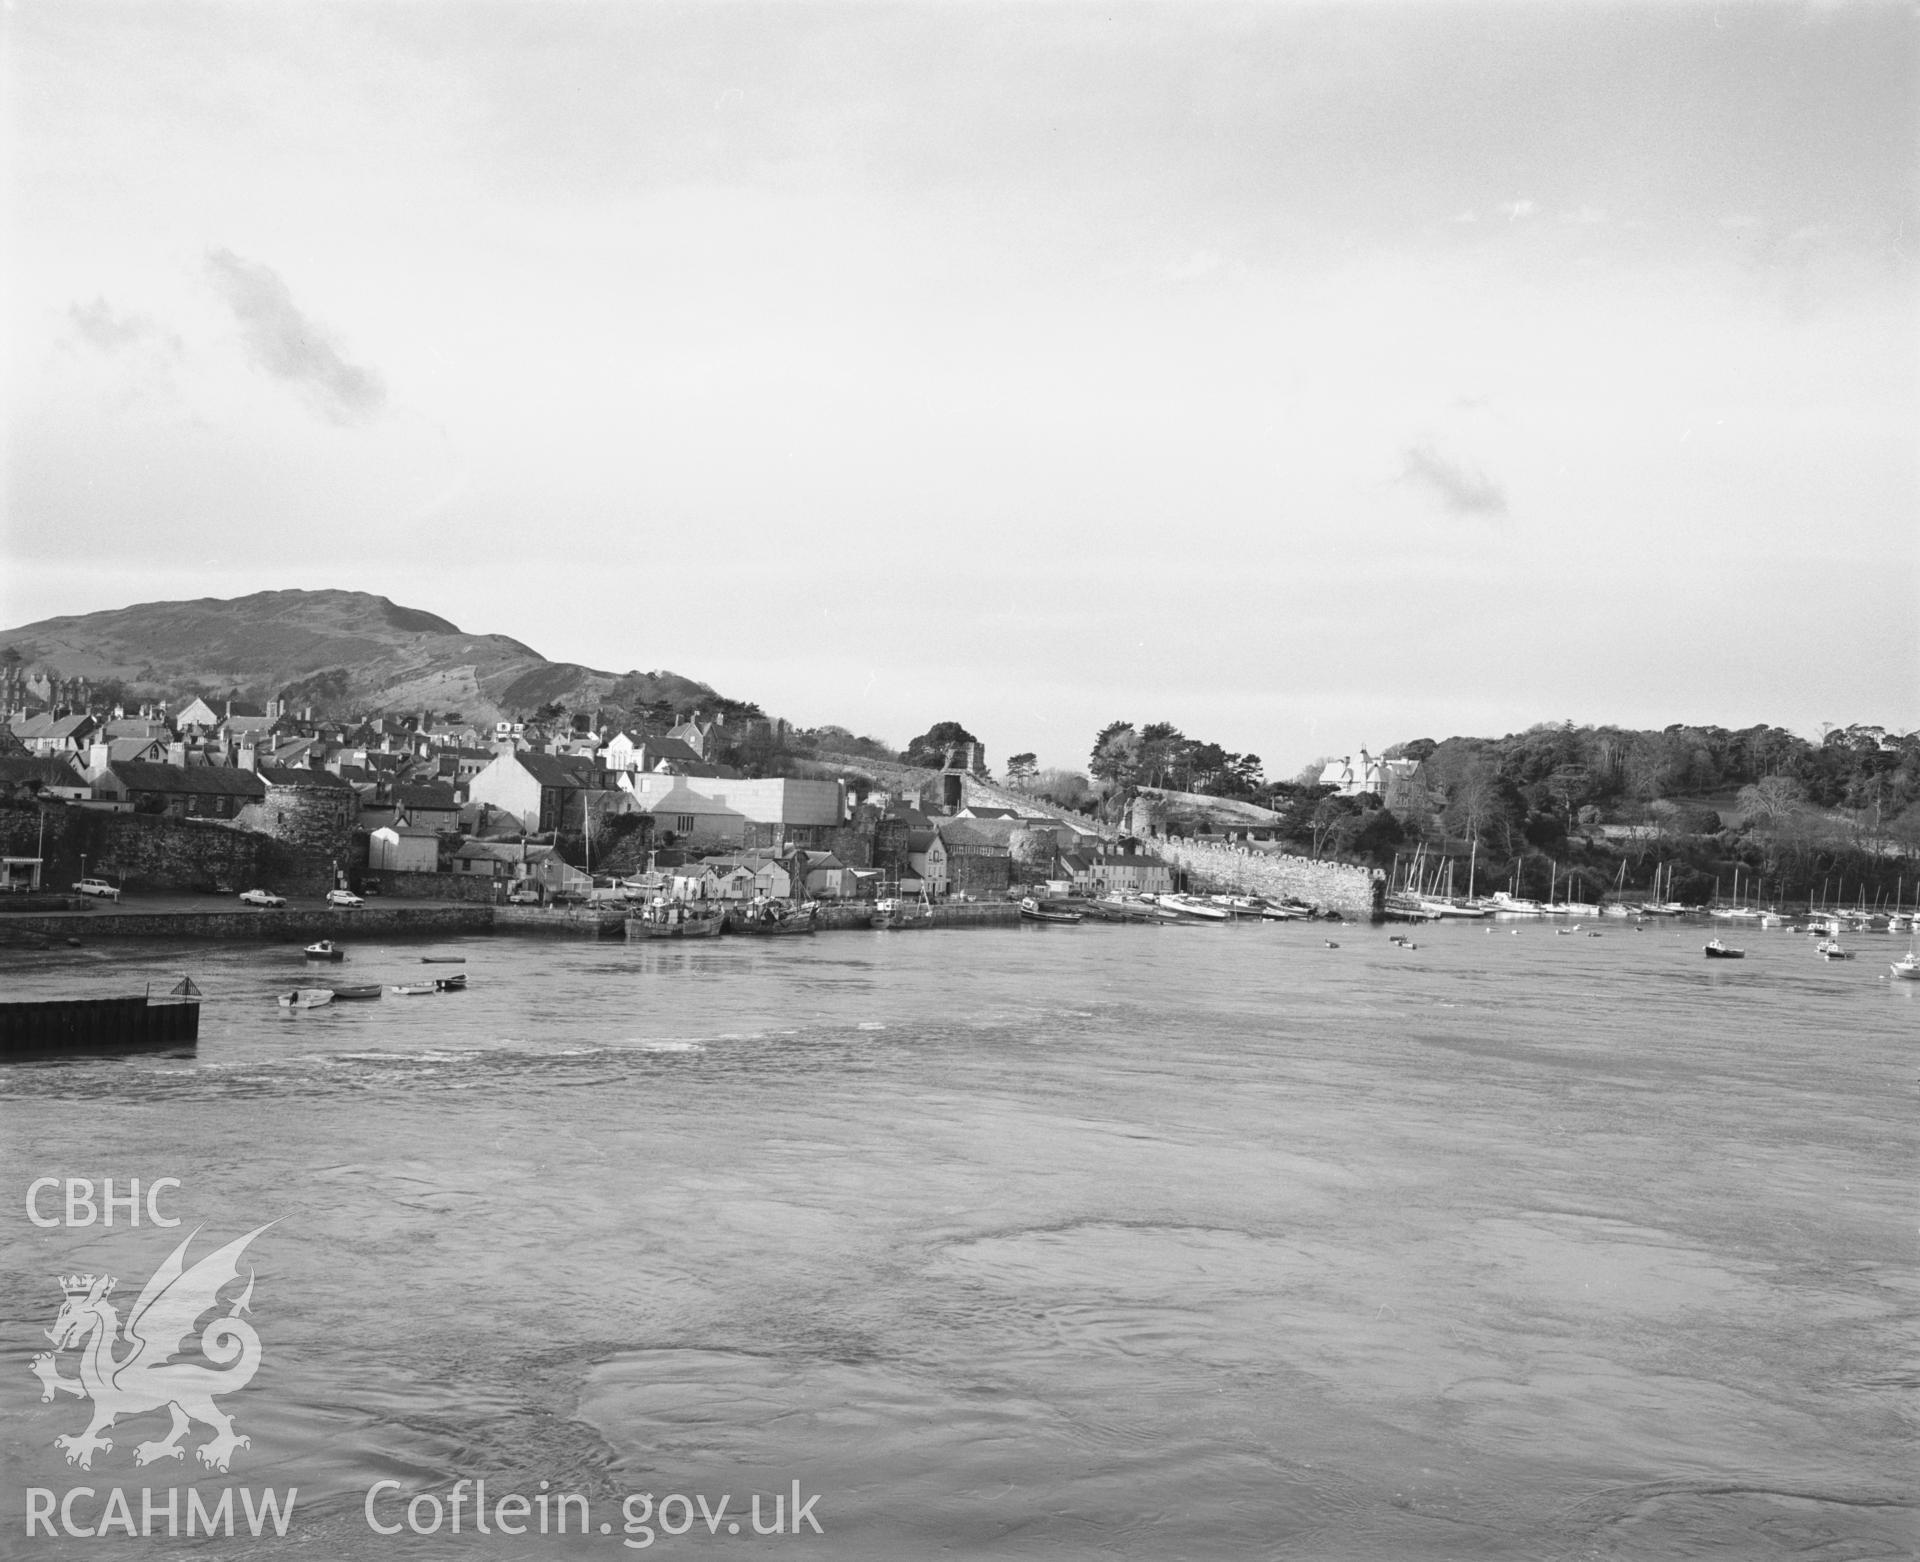 Photographic negative showing distant view of Conwy from the sea; collated by the former Central Office of Information.